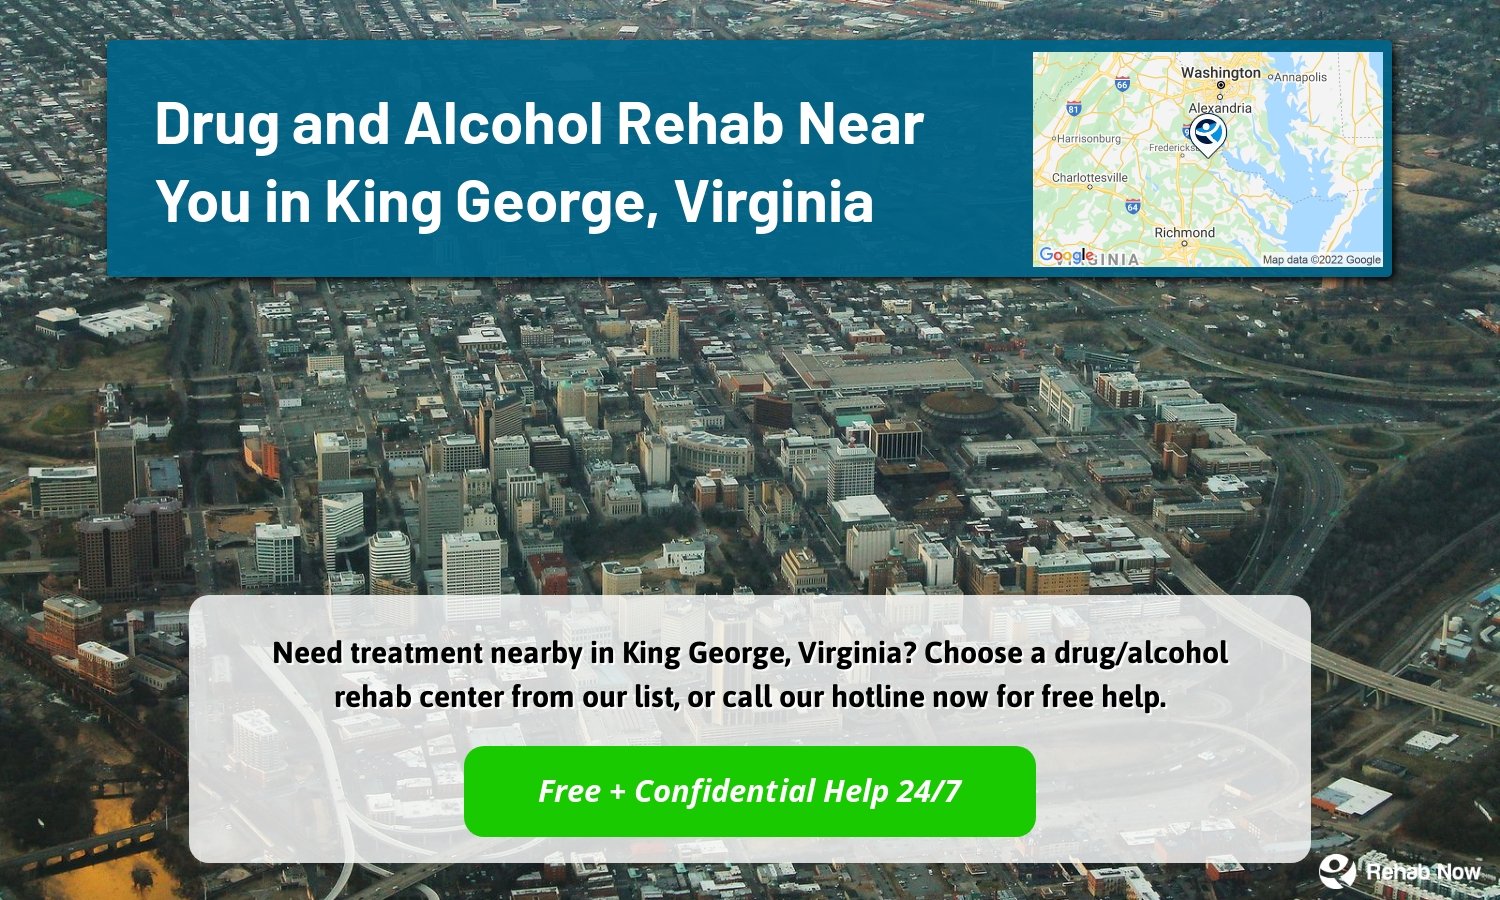 Need treatment nearby in King George, Virginia? Choose a drug/alcohol rehab center from our list, or call our hotline now for free help.